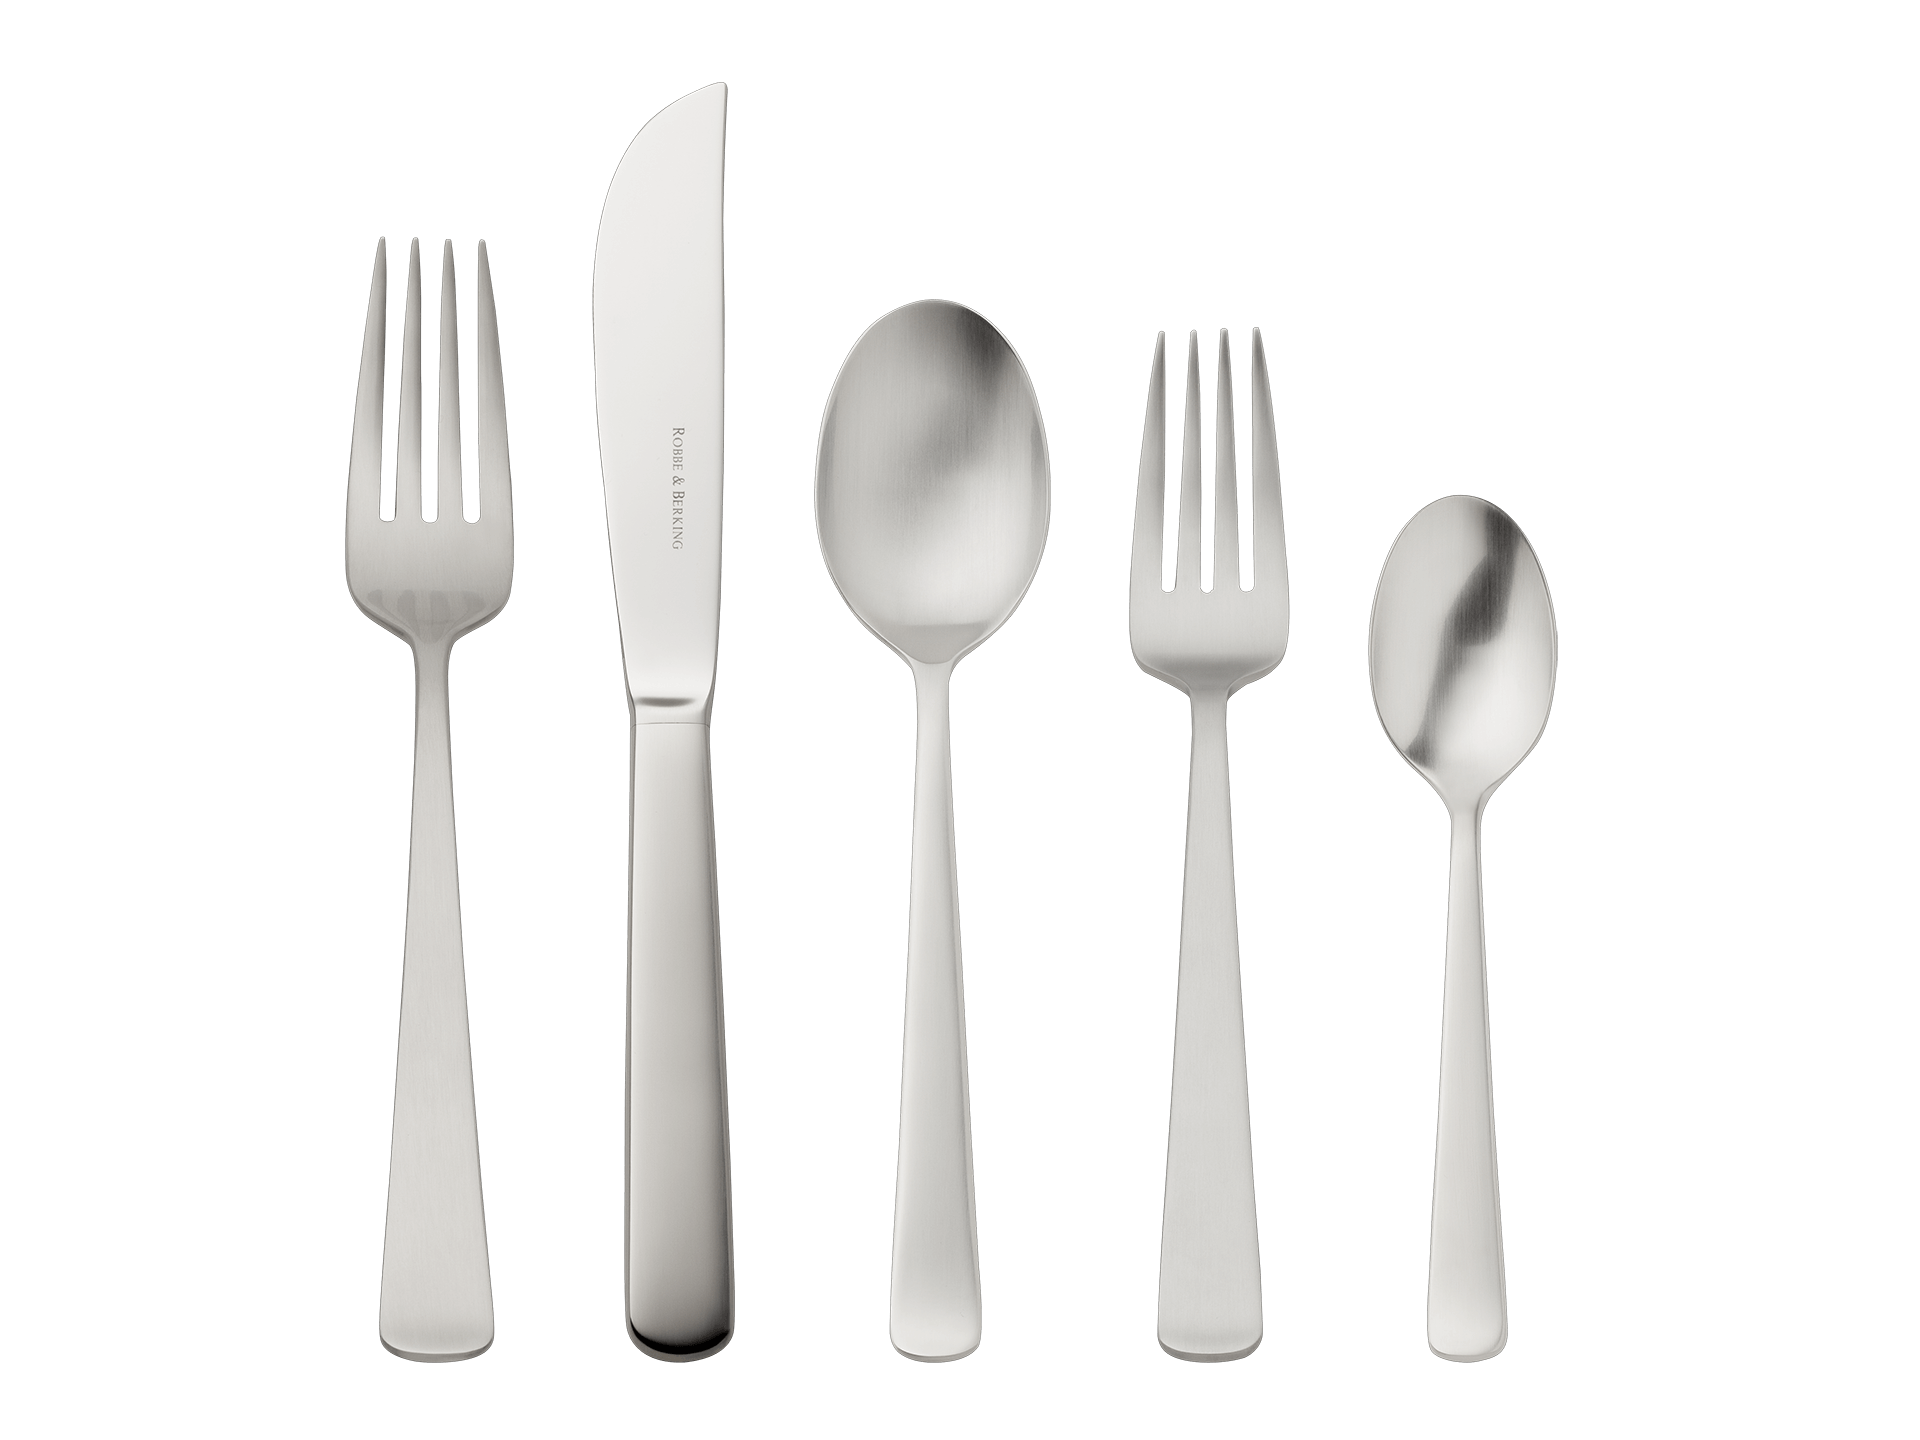 Atlantic 5-piece place setting (18/8 stainless steel)